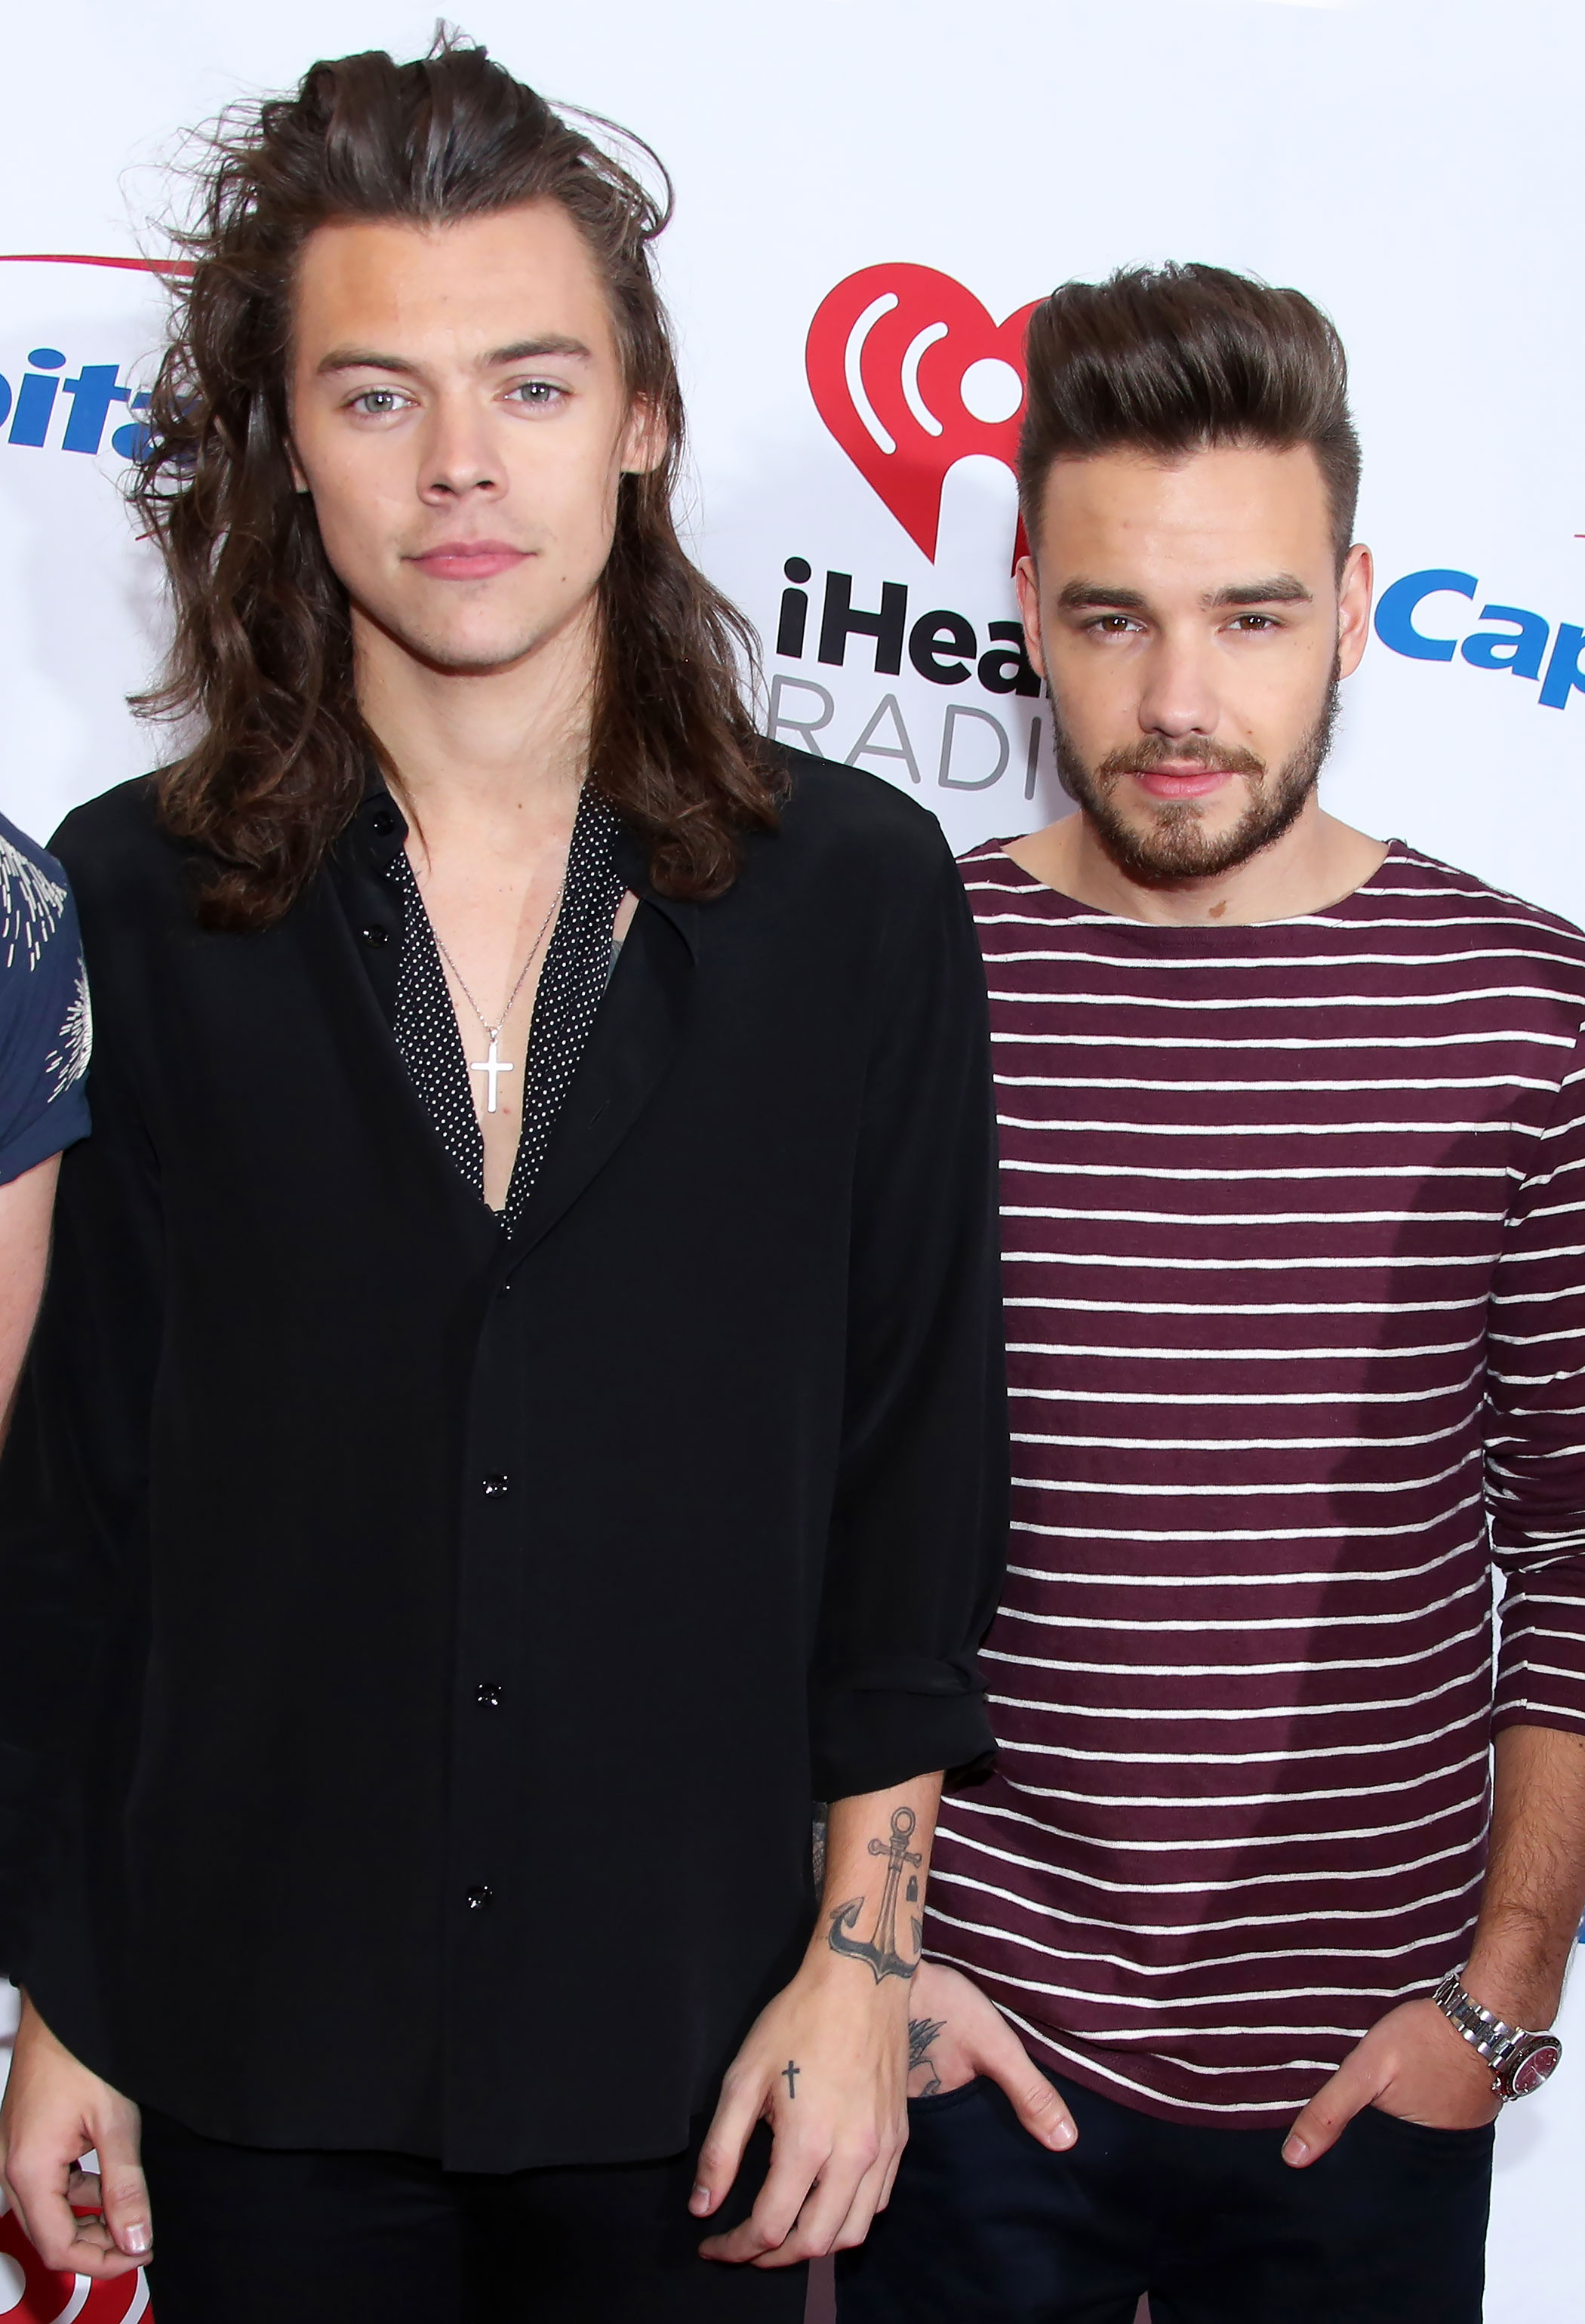 One Direction's Liam Payne Defends Harry Styles' 'Vogue' Cover